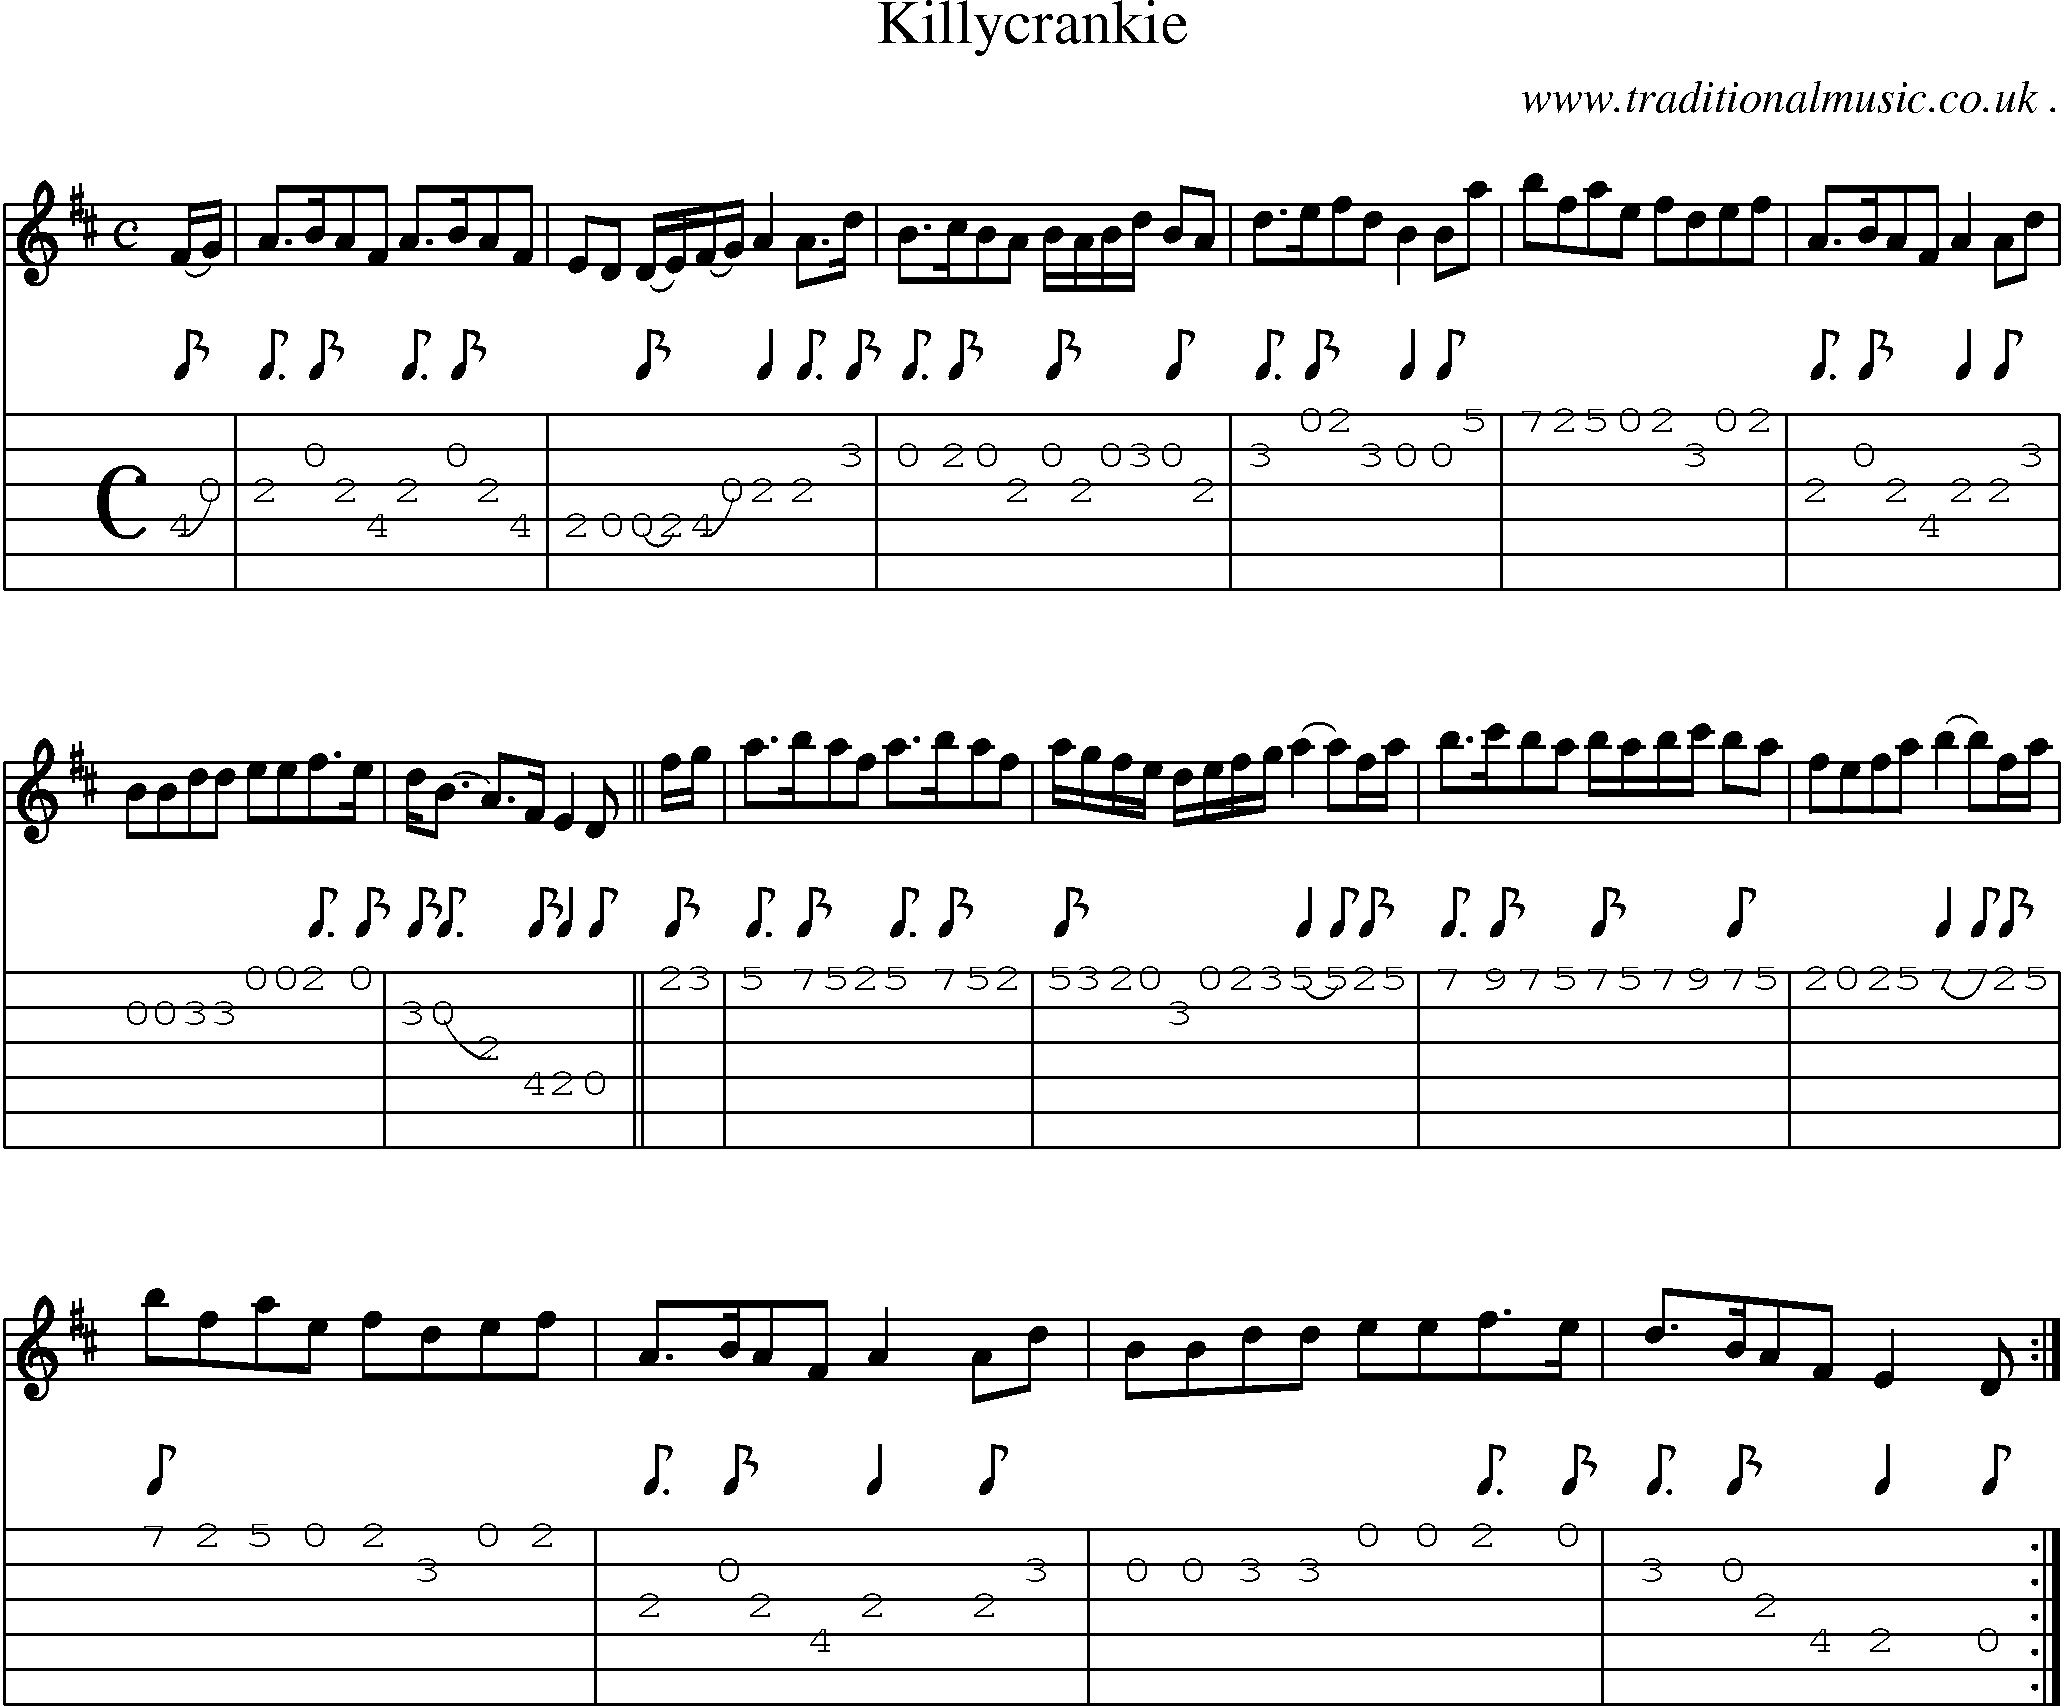 Sheet-Music and Guitar Tabs for Killycrankie